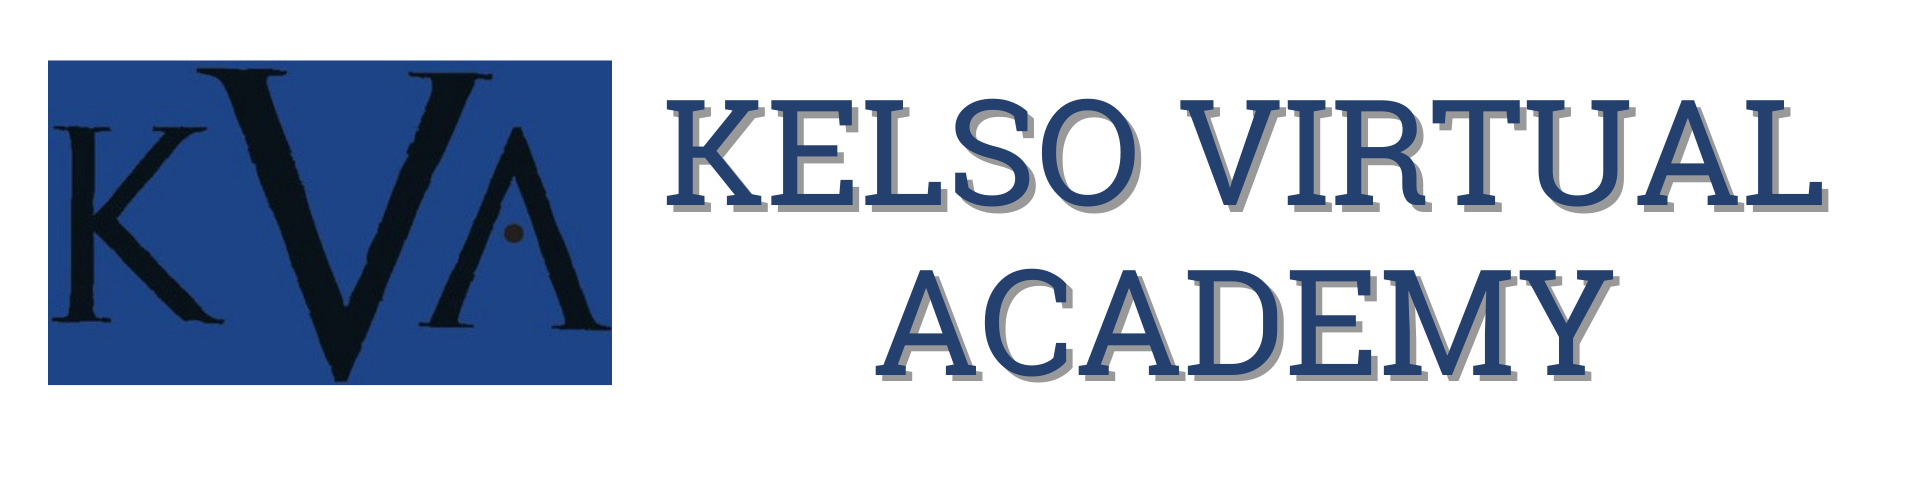 KELSO VIRTUAL ACADEMY